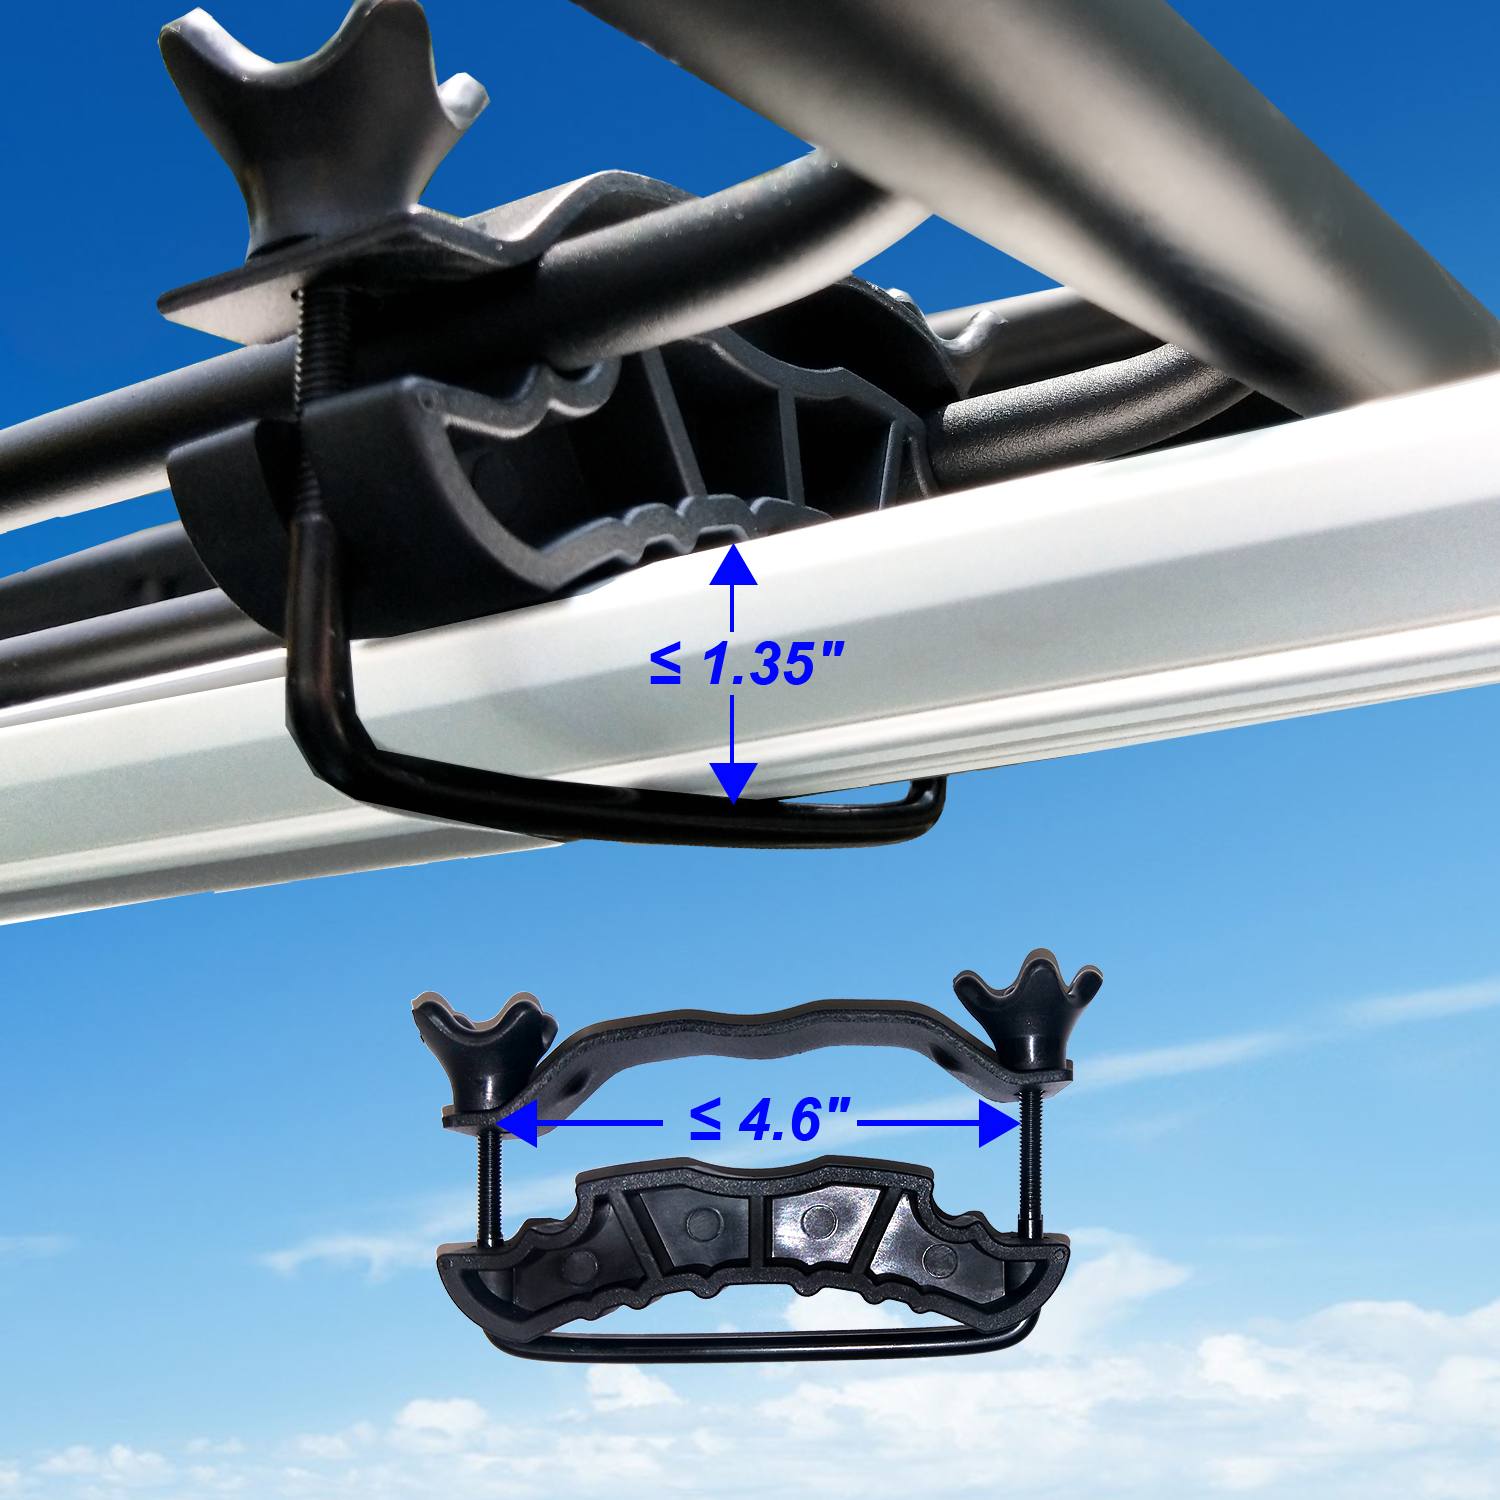 News - Knowledge about roof racks